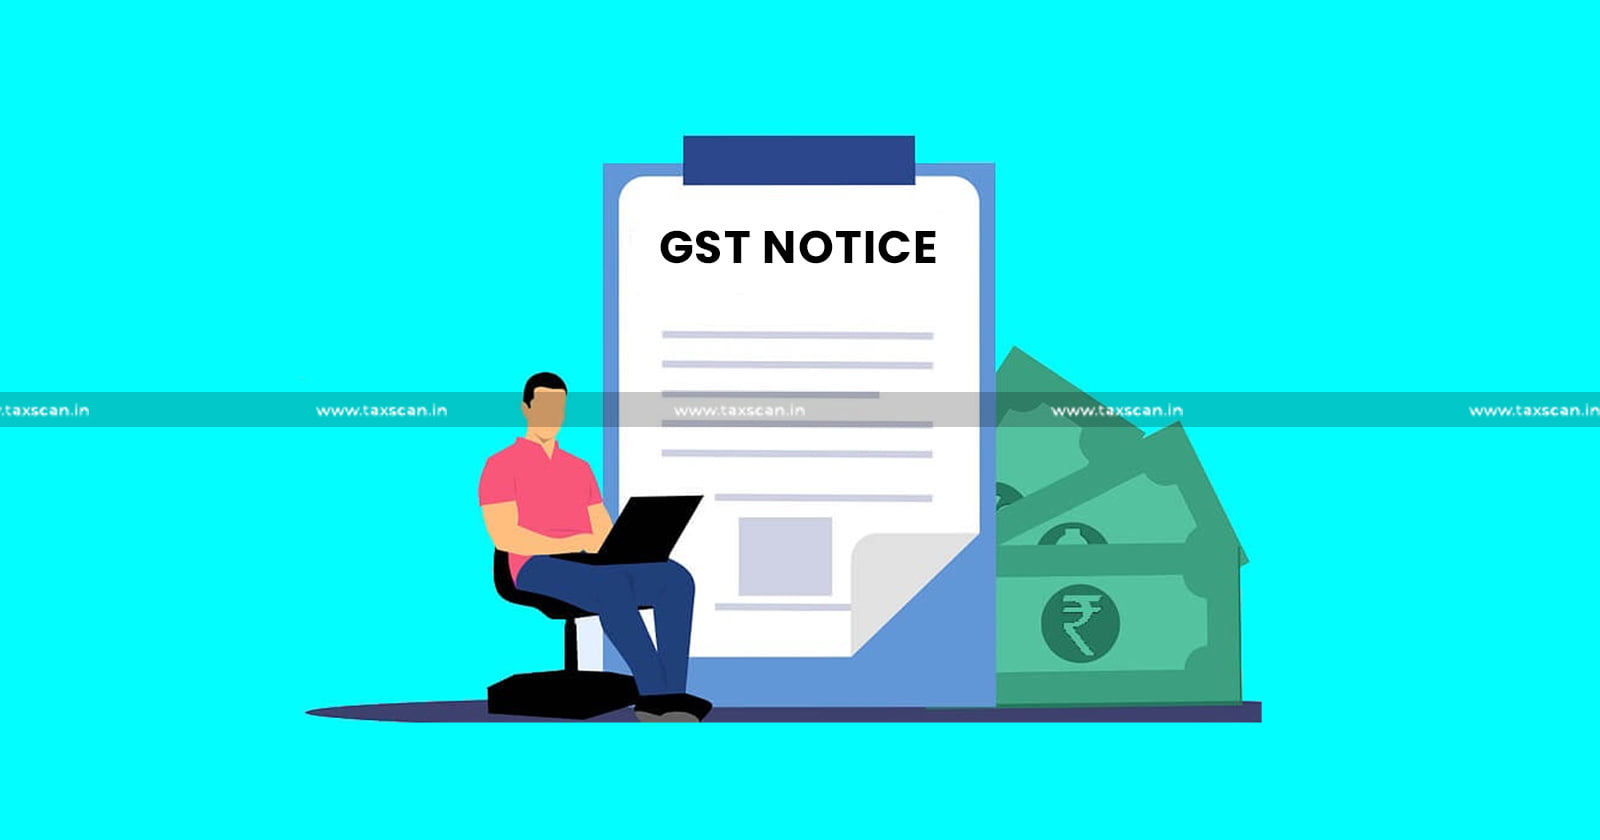 Kerala GST Dept - Guidelines - Non-Issuance - Notices - Voluntary Compliance - taxscan